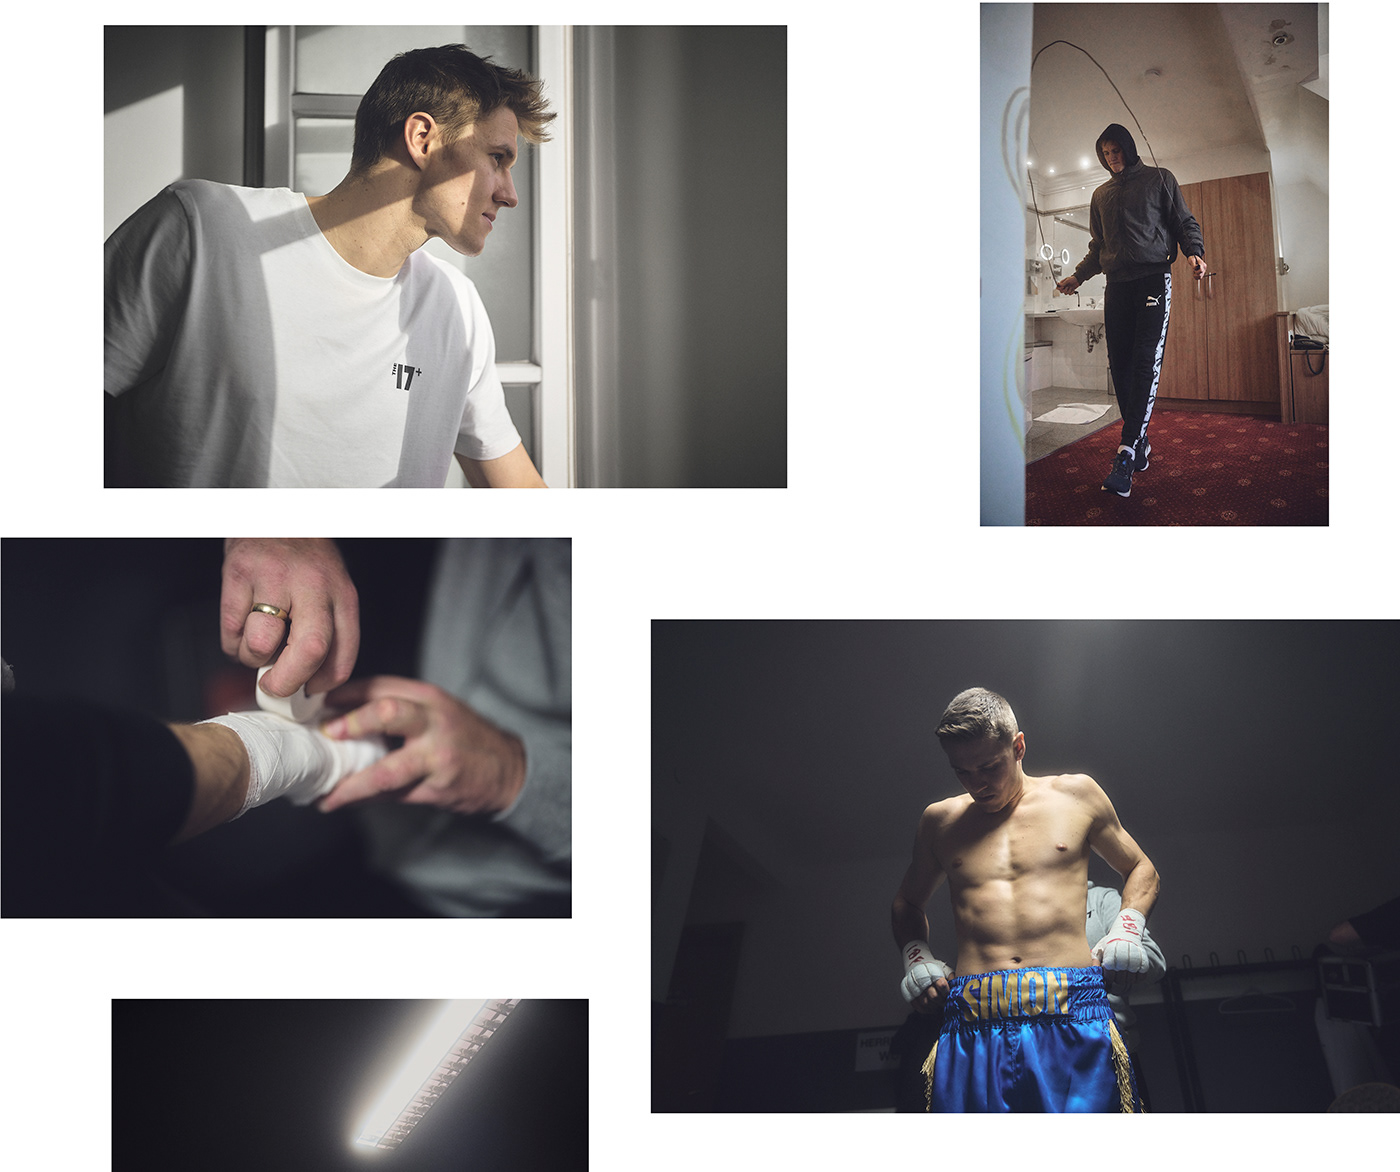 art Boxing digital Fighter Leica Nikon person Photography  Sony sports